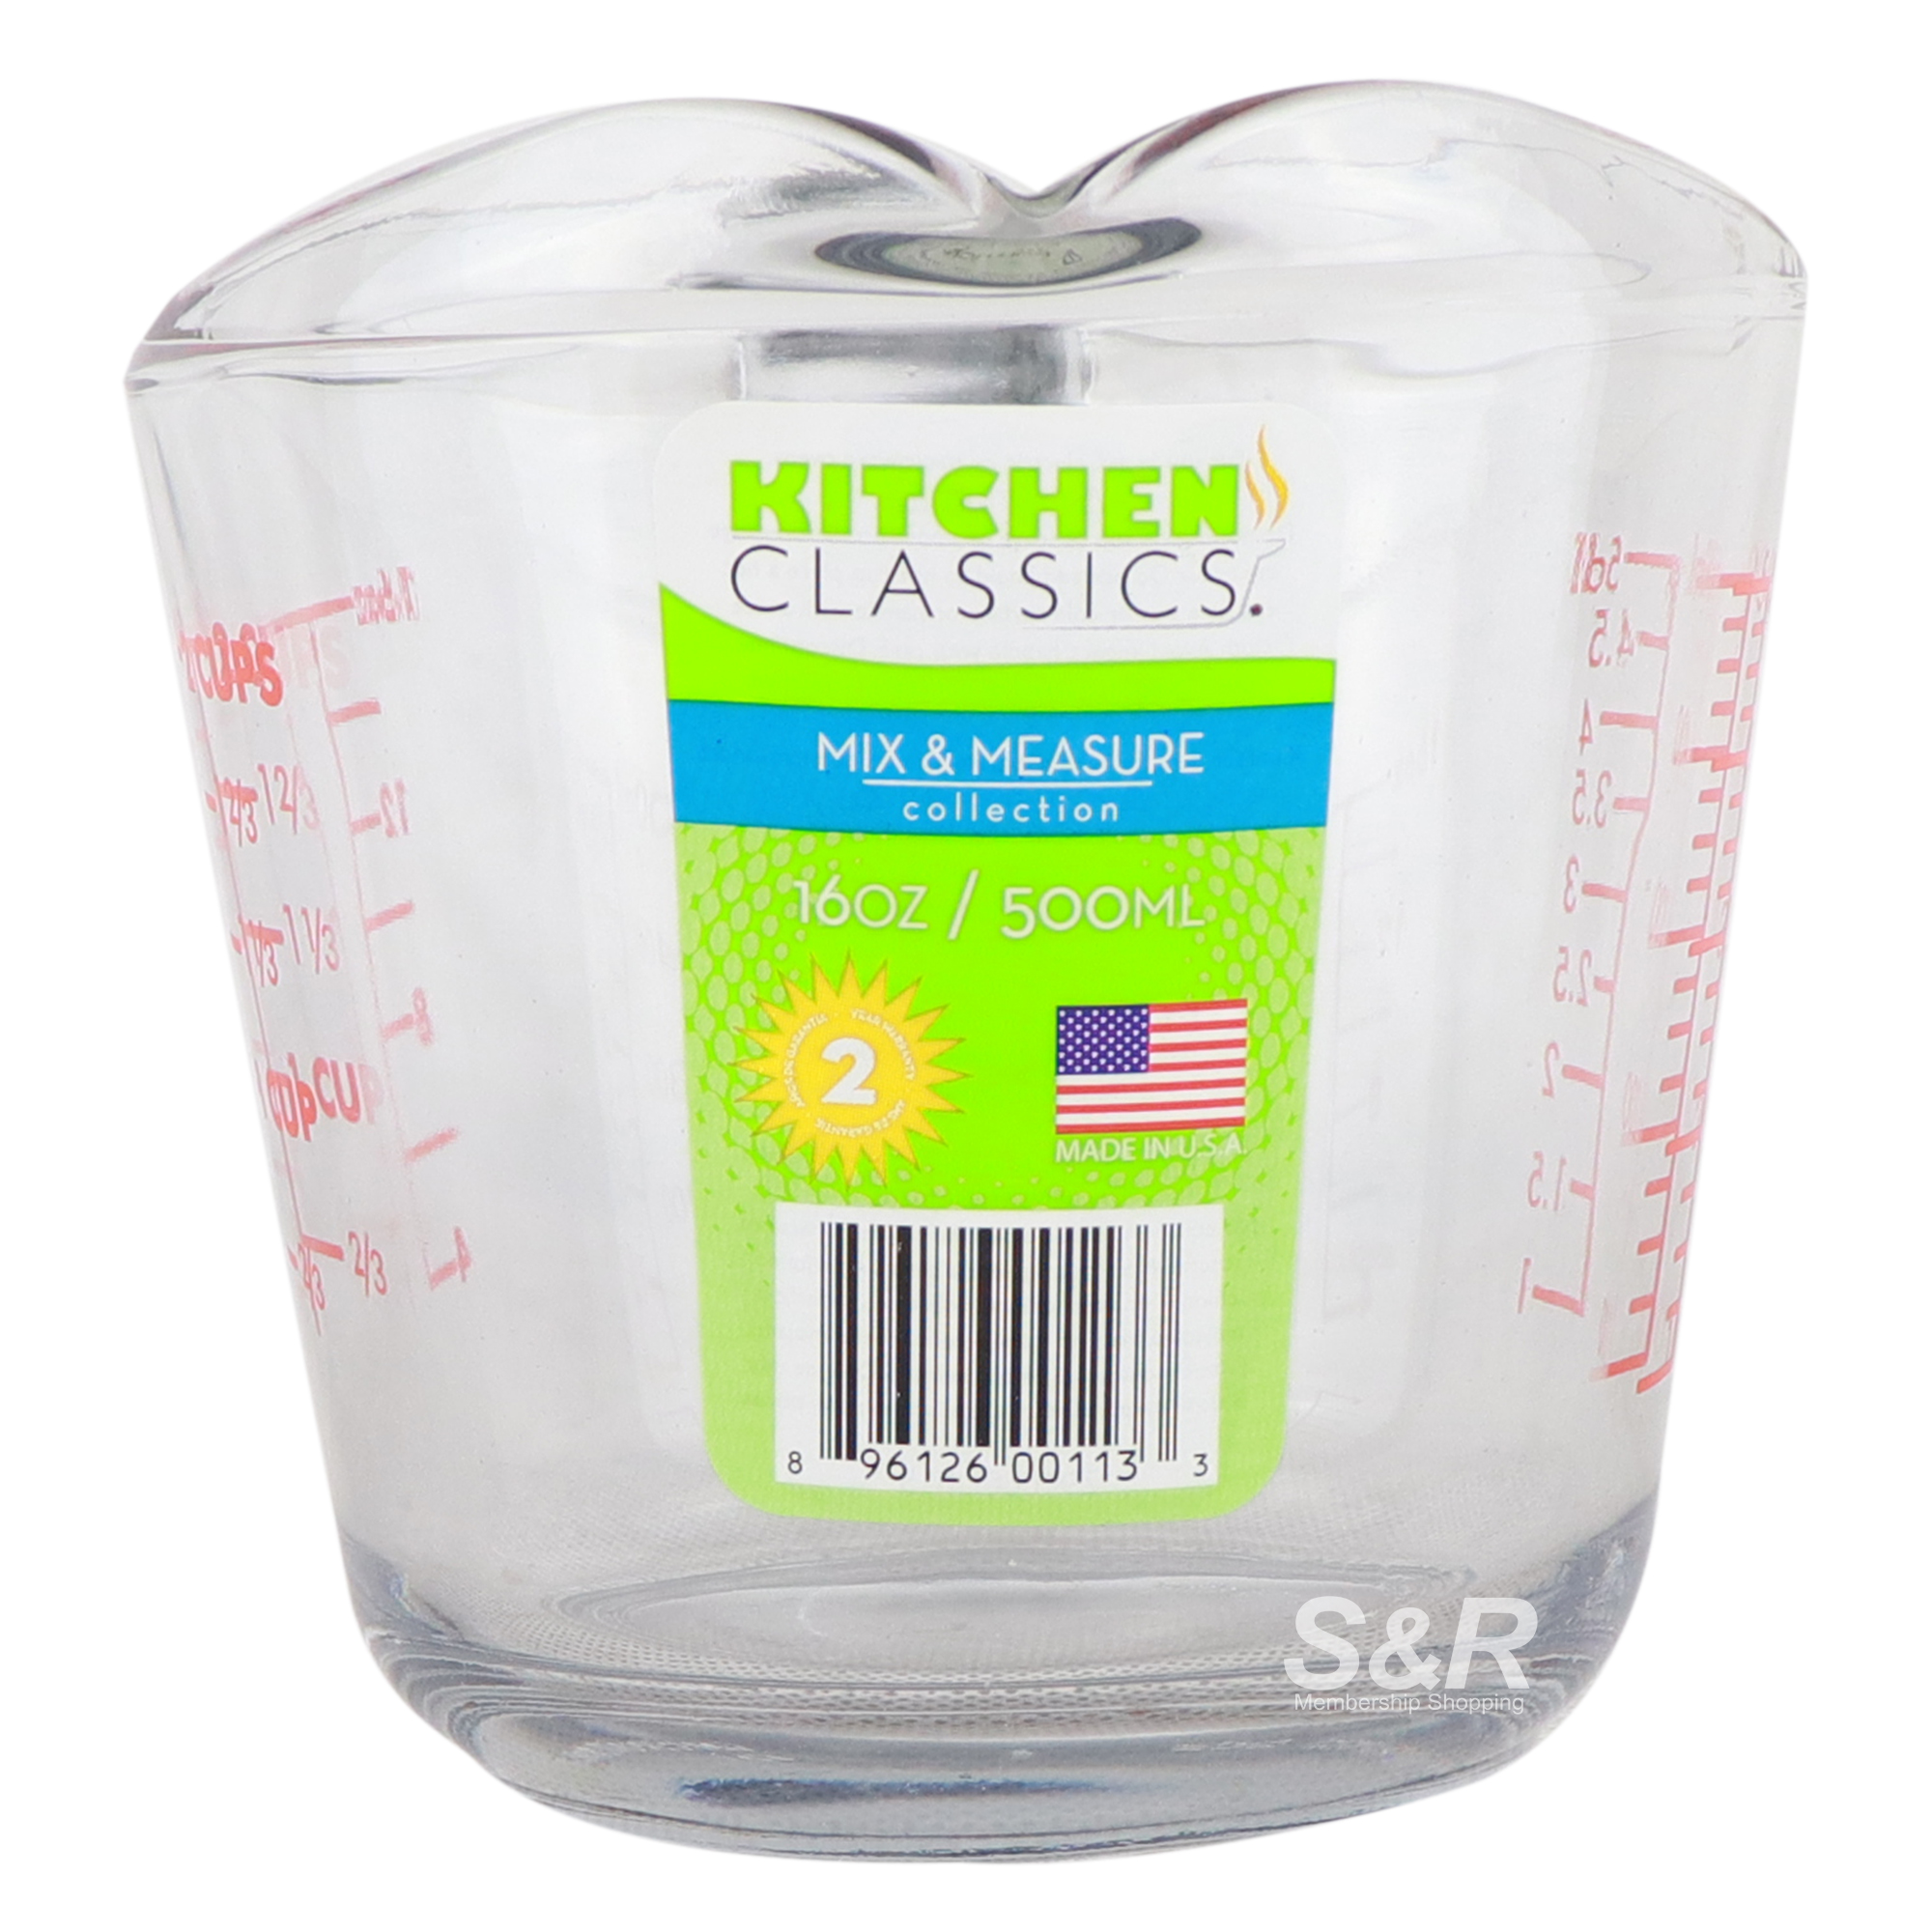 Kitchen Classics Mix and Measure Collection Measuring Cup 1pc